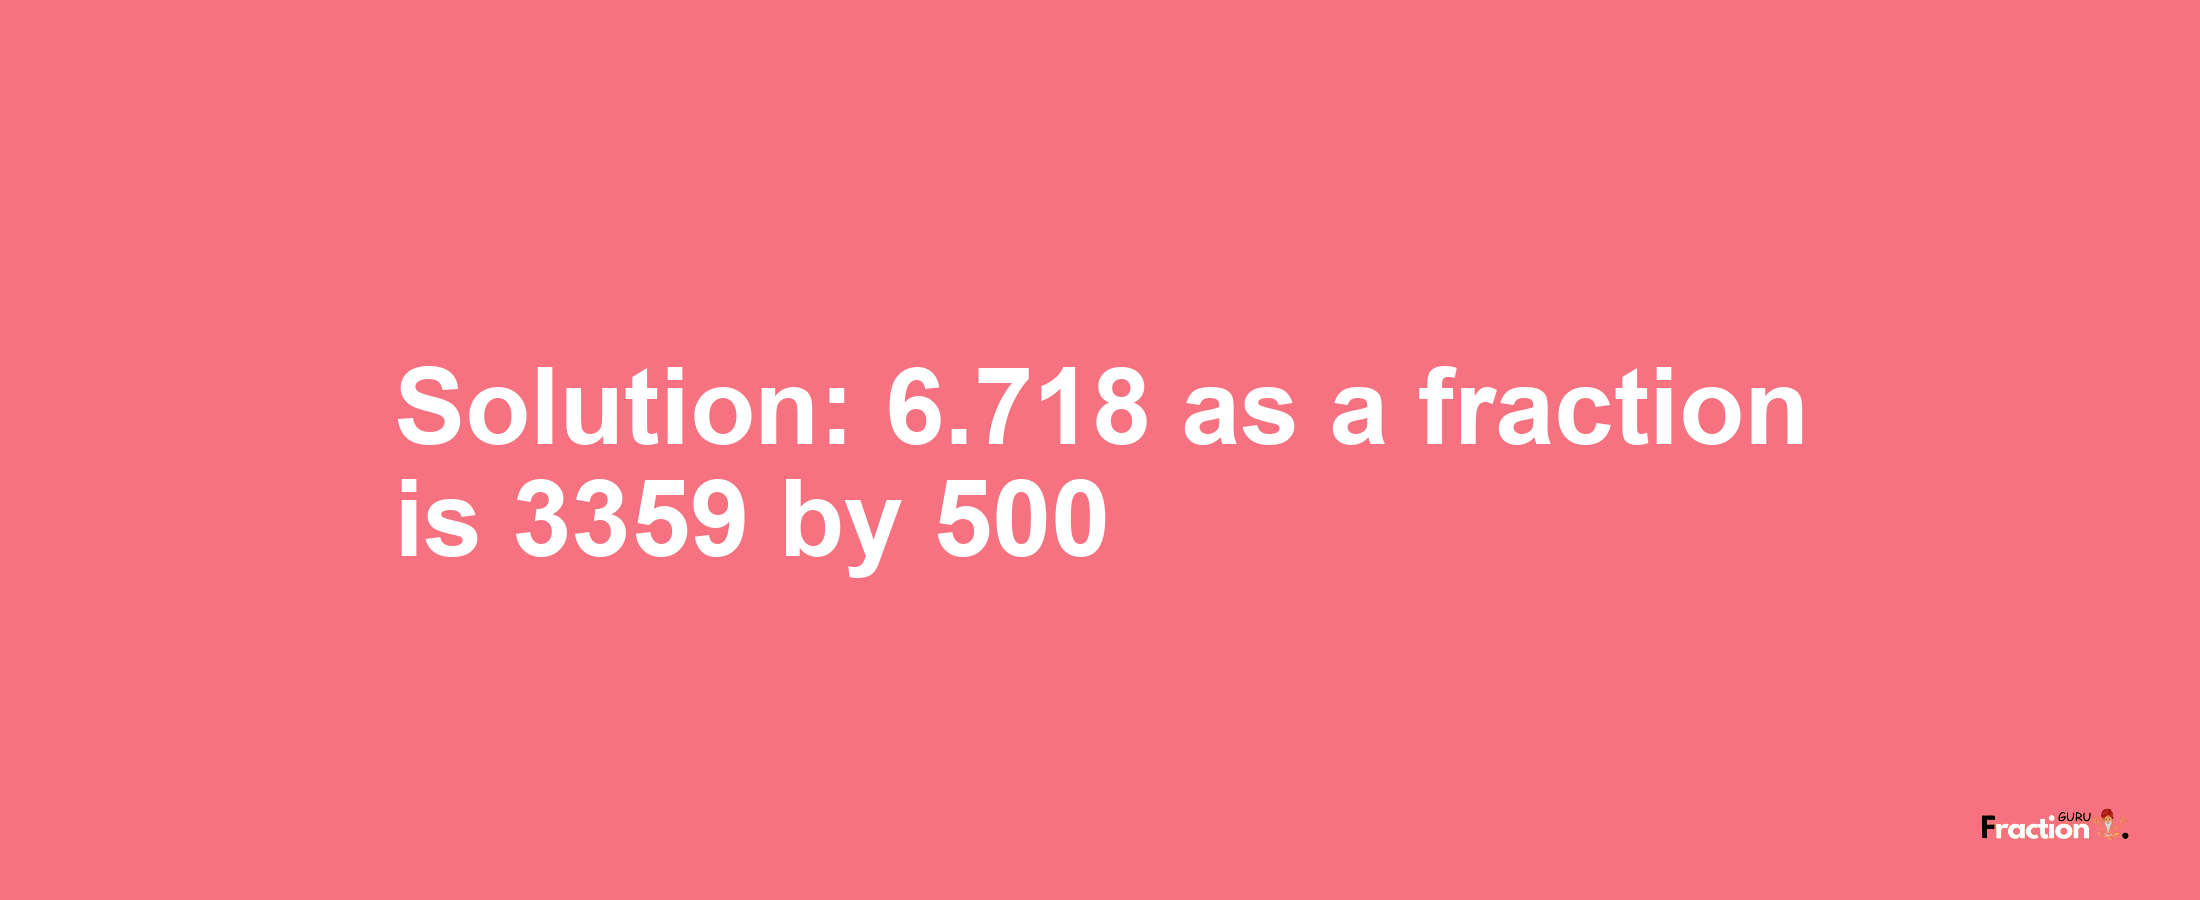 Solution:6.718 as a fraction is 3359/500